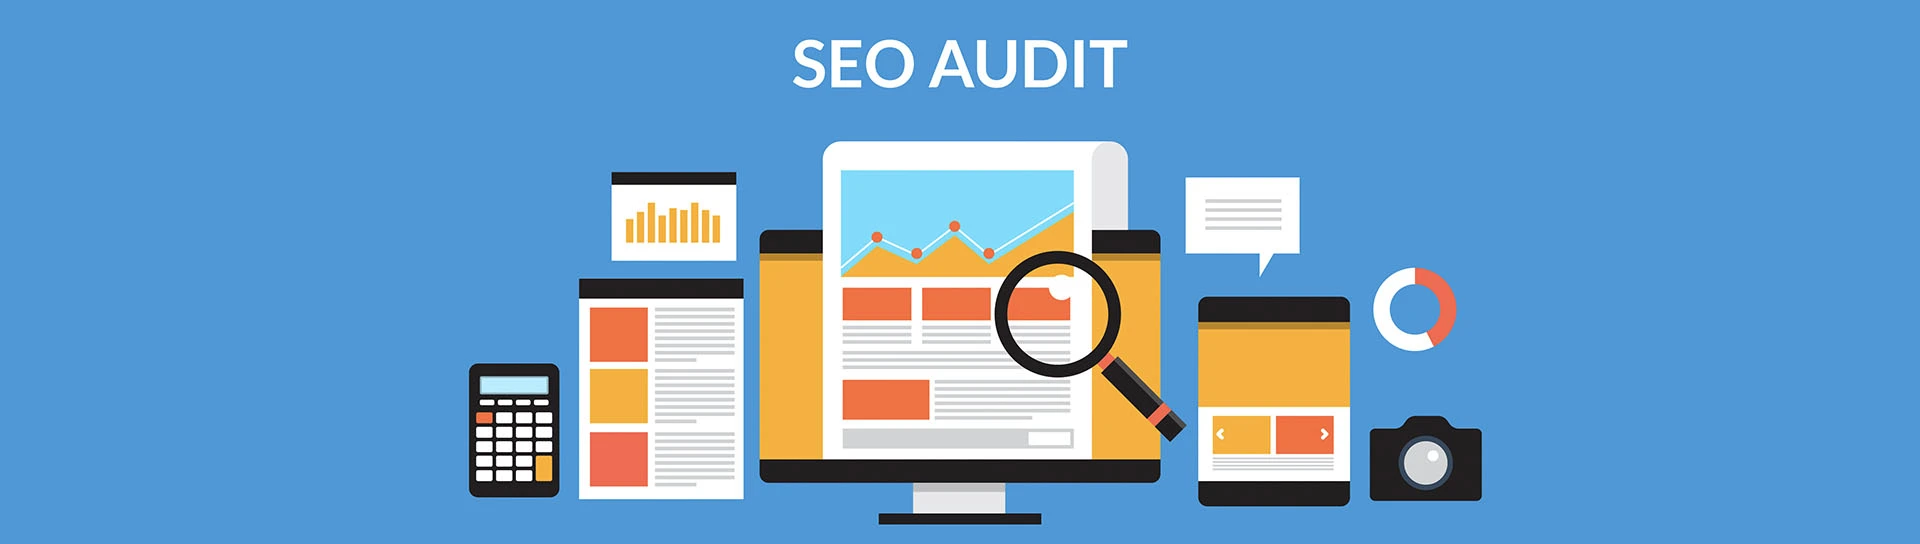 How To Do An Enterprise SEO Audit? - Step By Step Guide